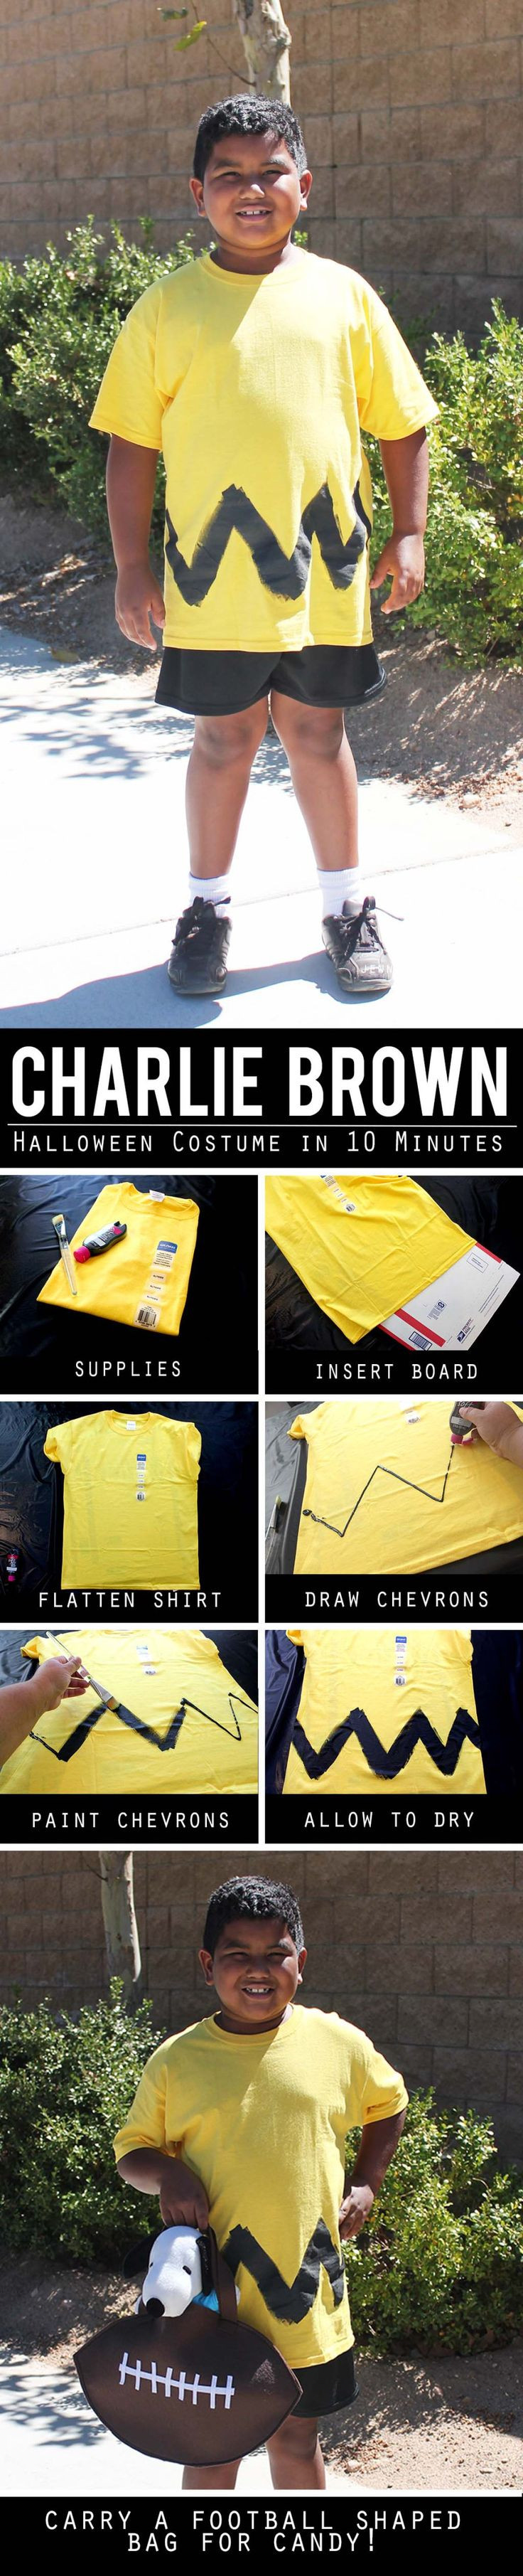 DIY Charlie Brown Costume
 17 Best ideas about Charlie Brown Football on Pinterest